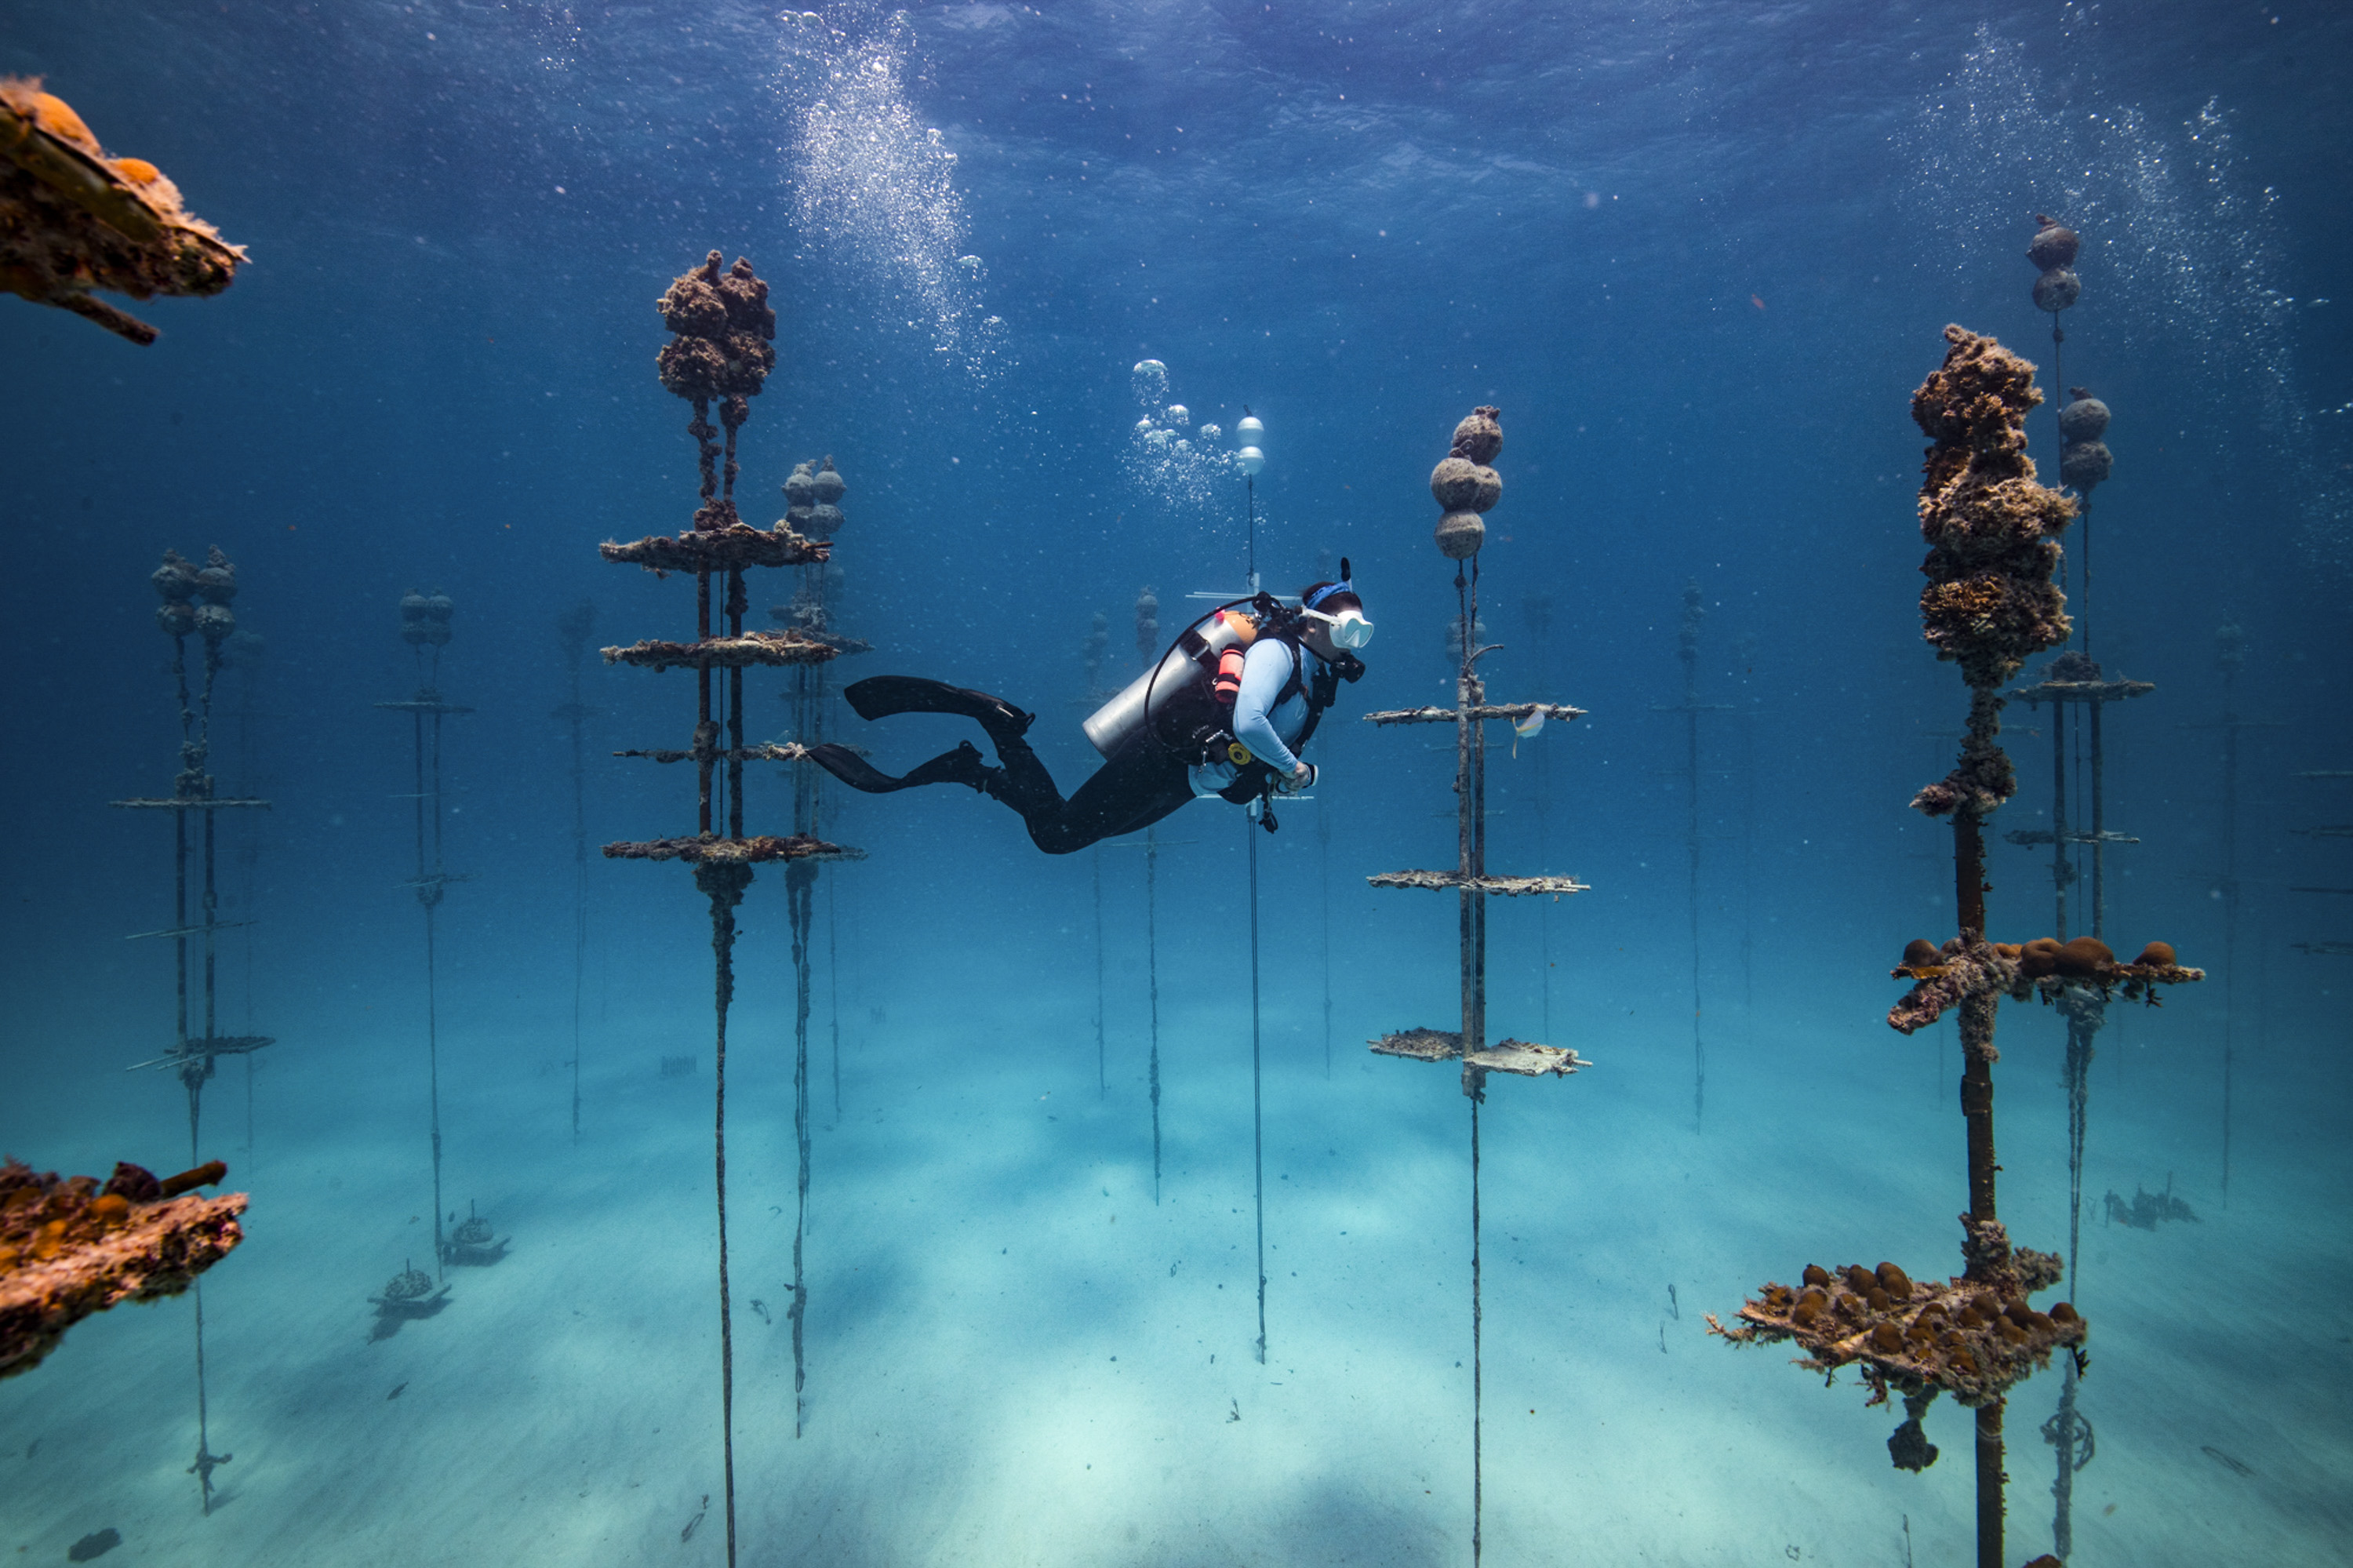 A scuba diver swimming through a coral nursery made up of coral branches growing on vertical chains anchored to the sand.